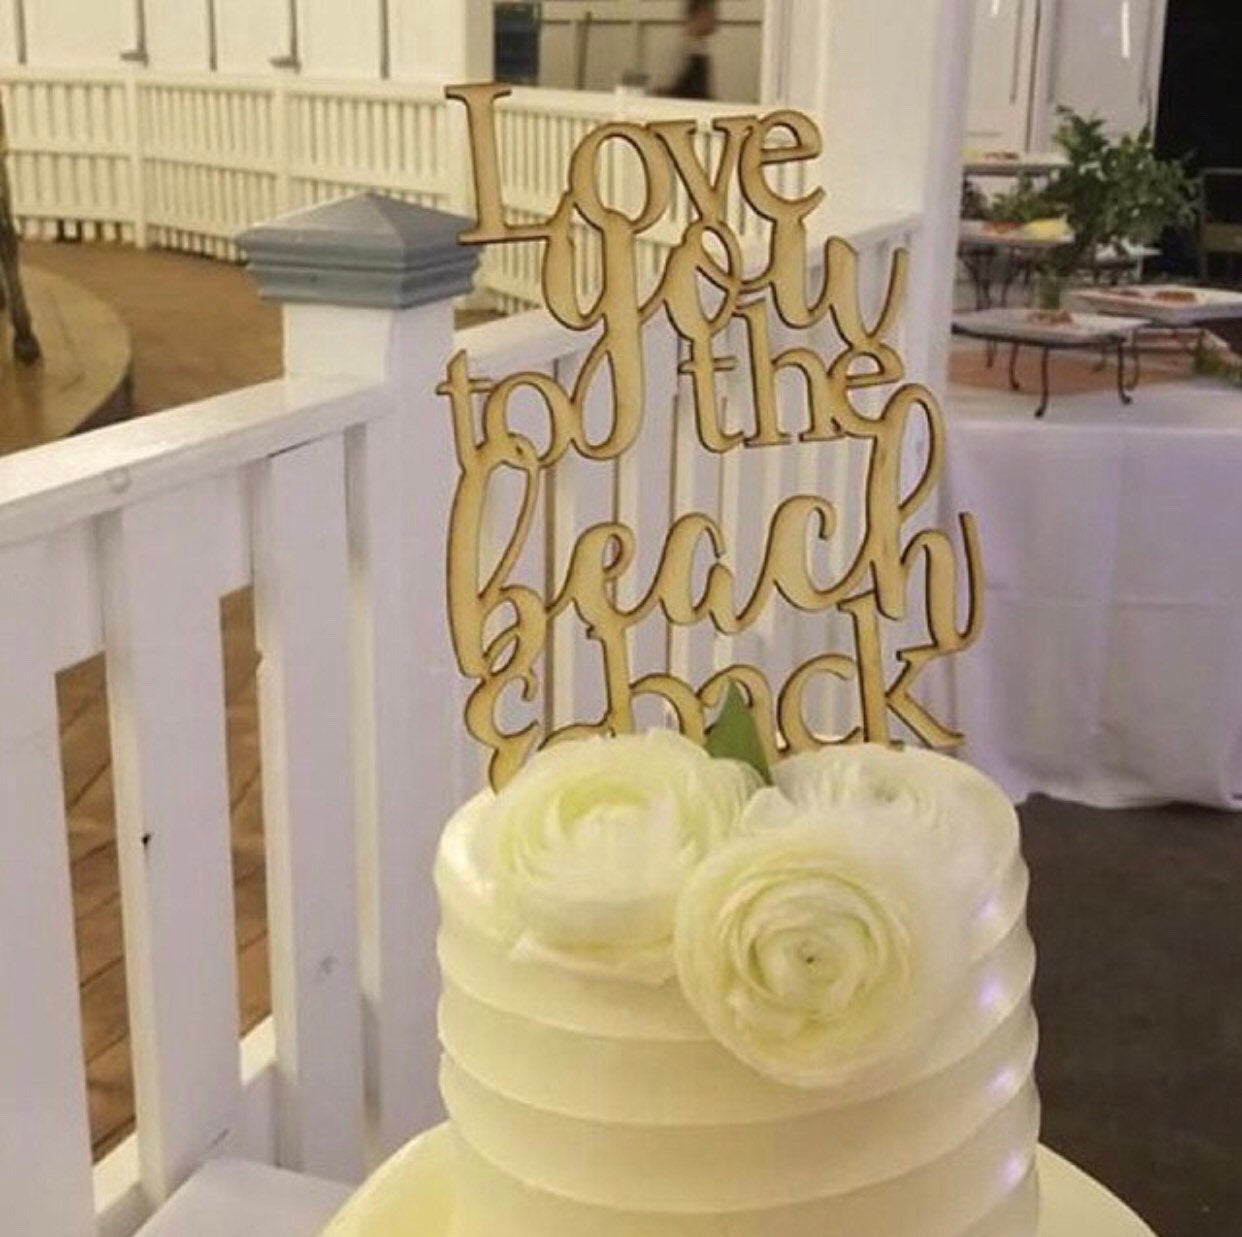 Love You to the Beach and Back Cake Topper